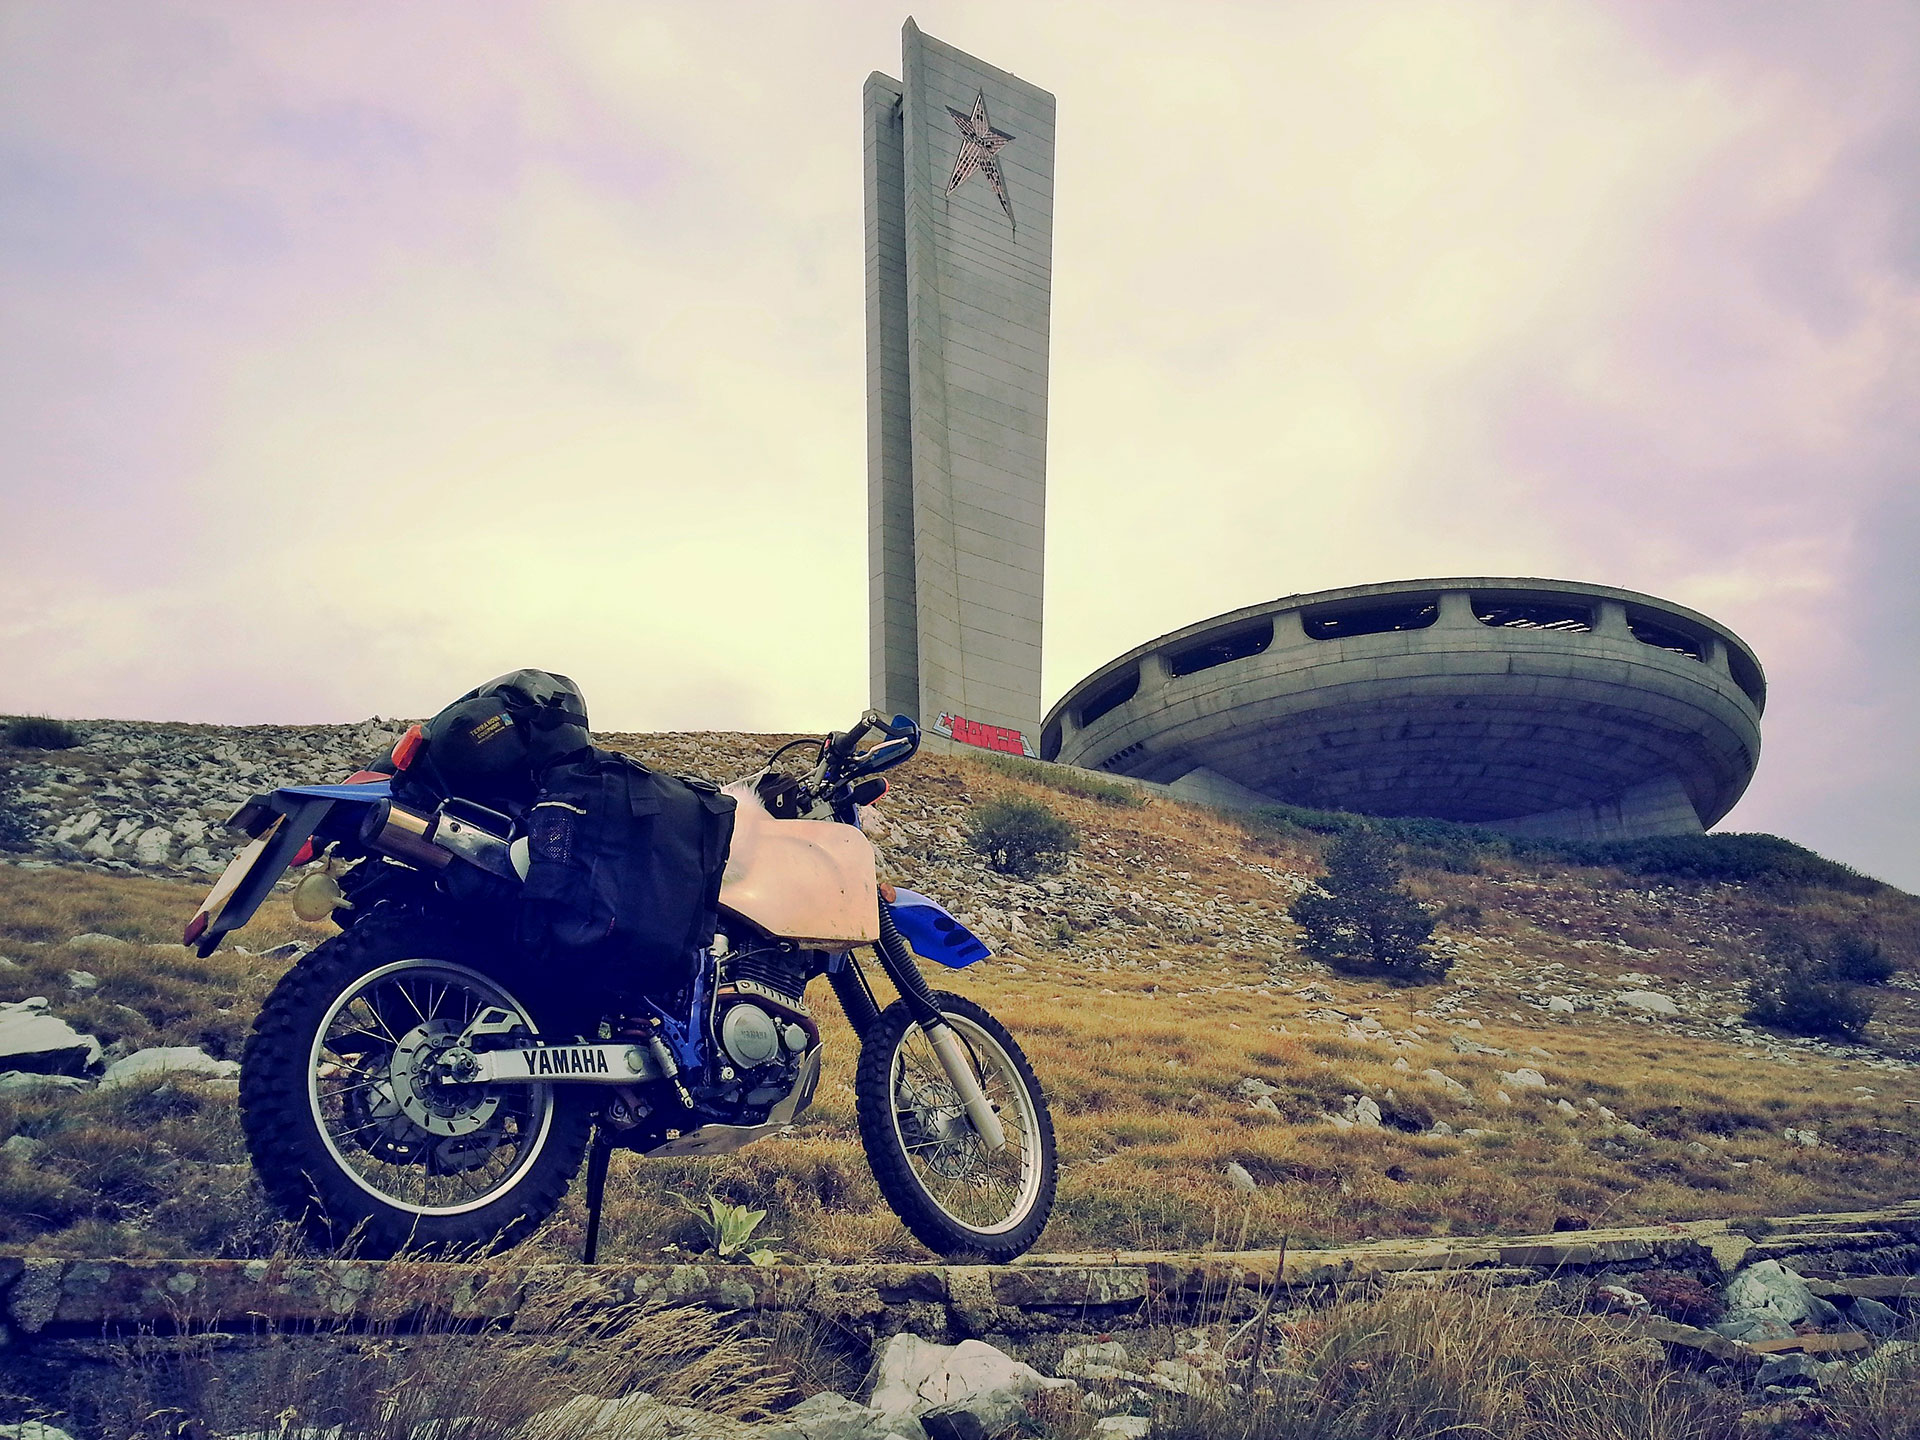 Lois Pryce's motorbike next to an abandoned Soviet-era UFO-shaped building in Bulgaria